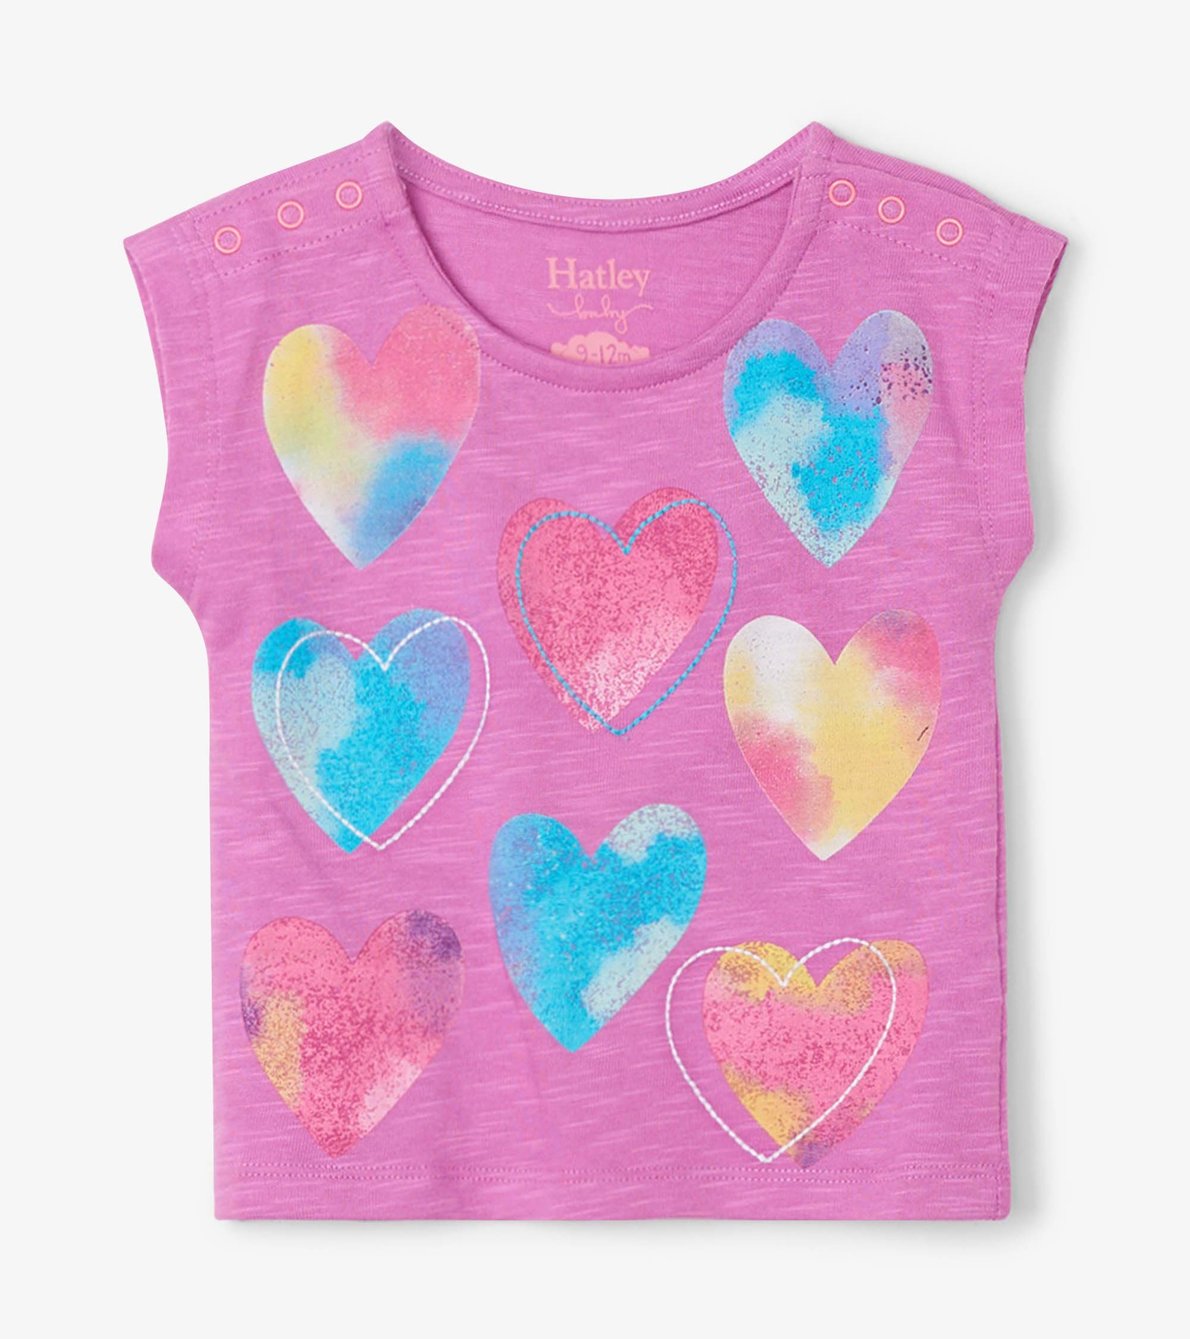 View larger image of Sweet Hearts Baby Tee